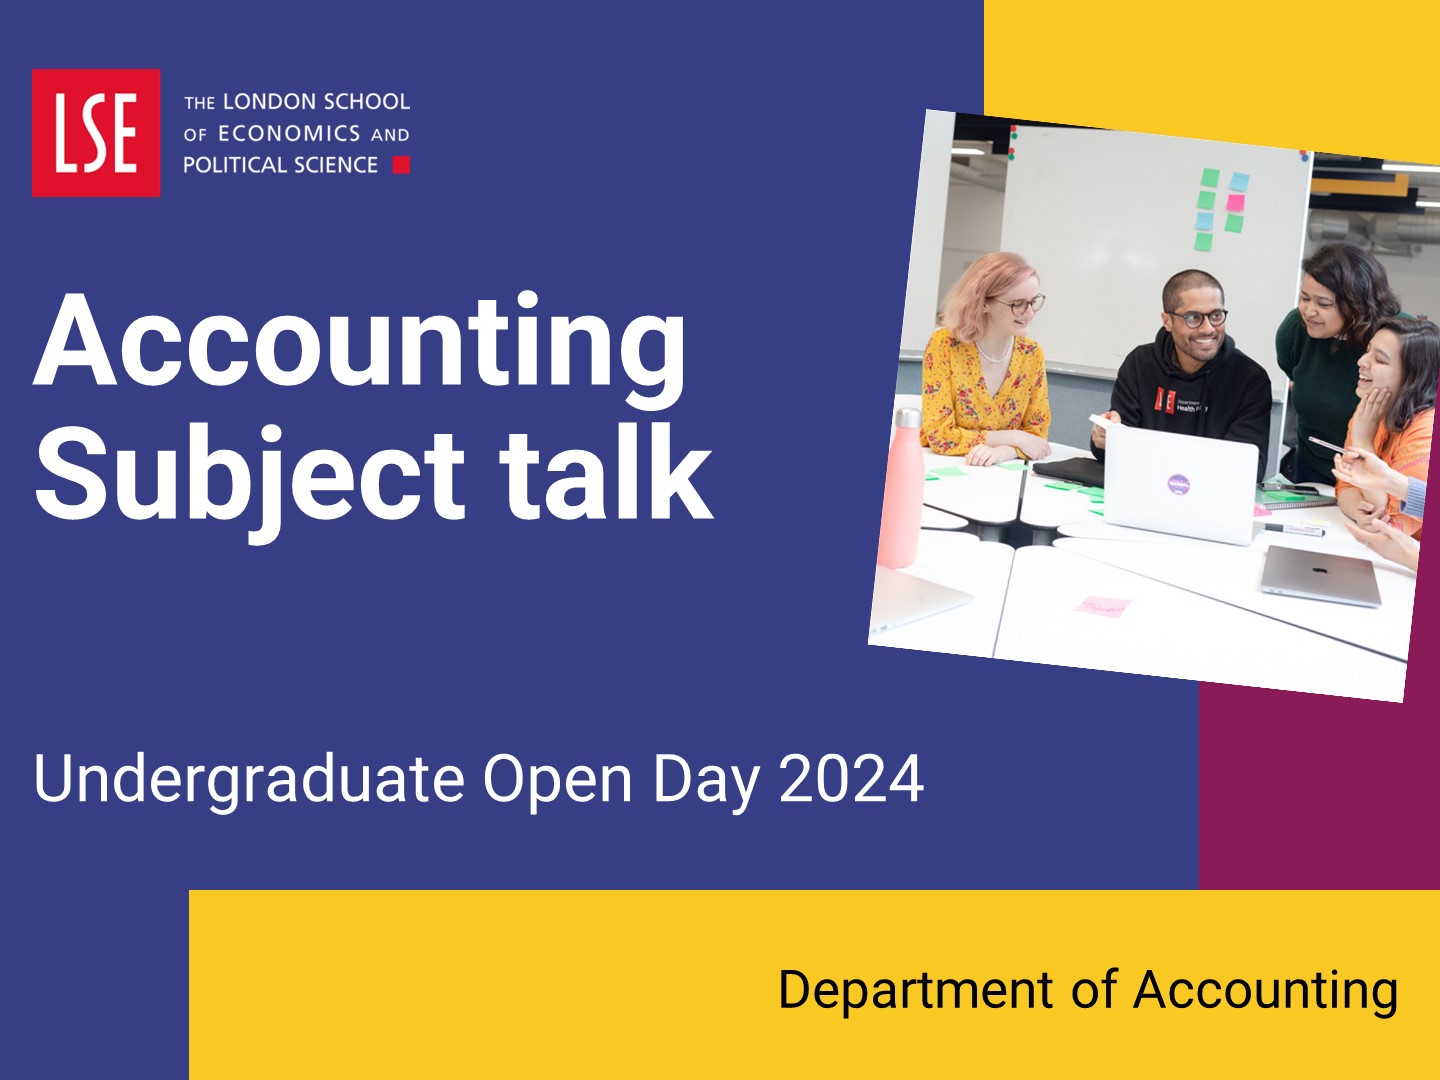 Virtual Open Day 2024 - Accounting